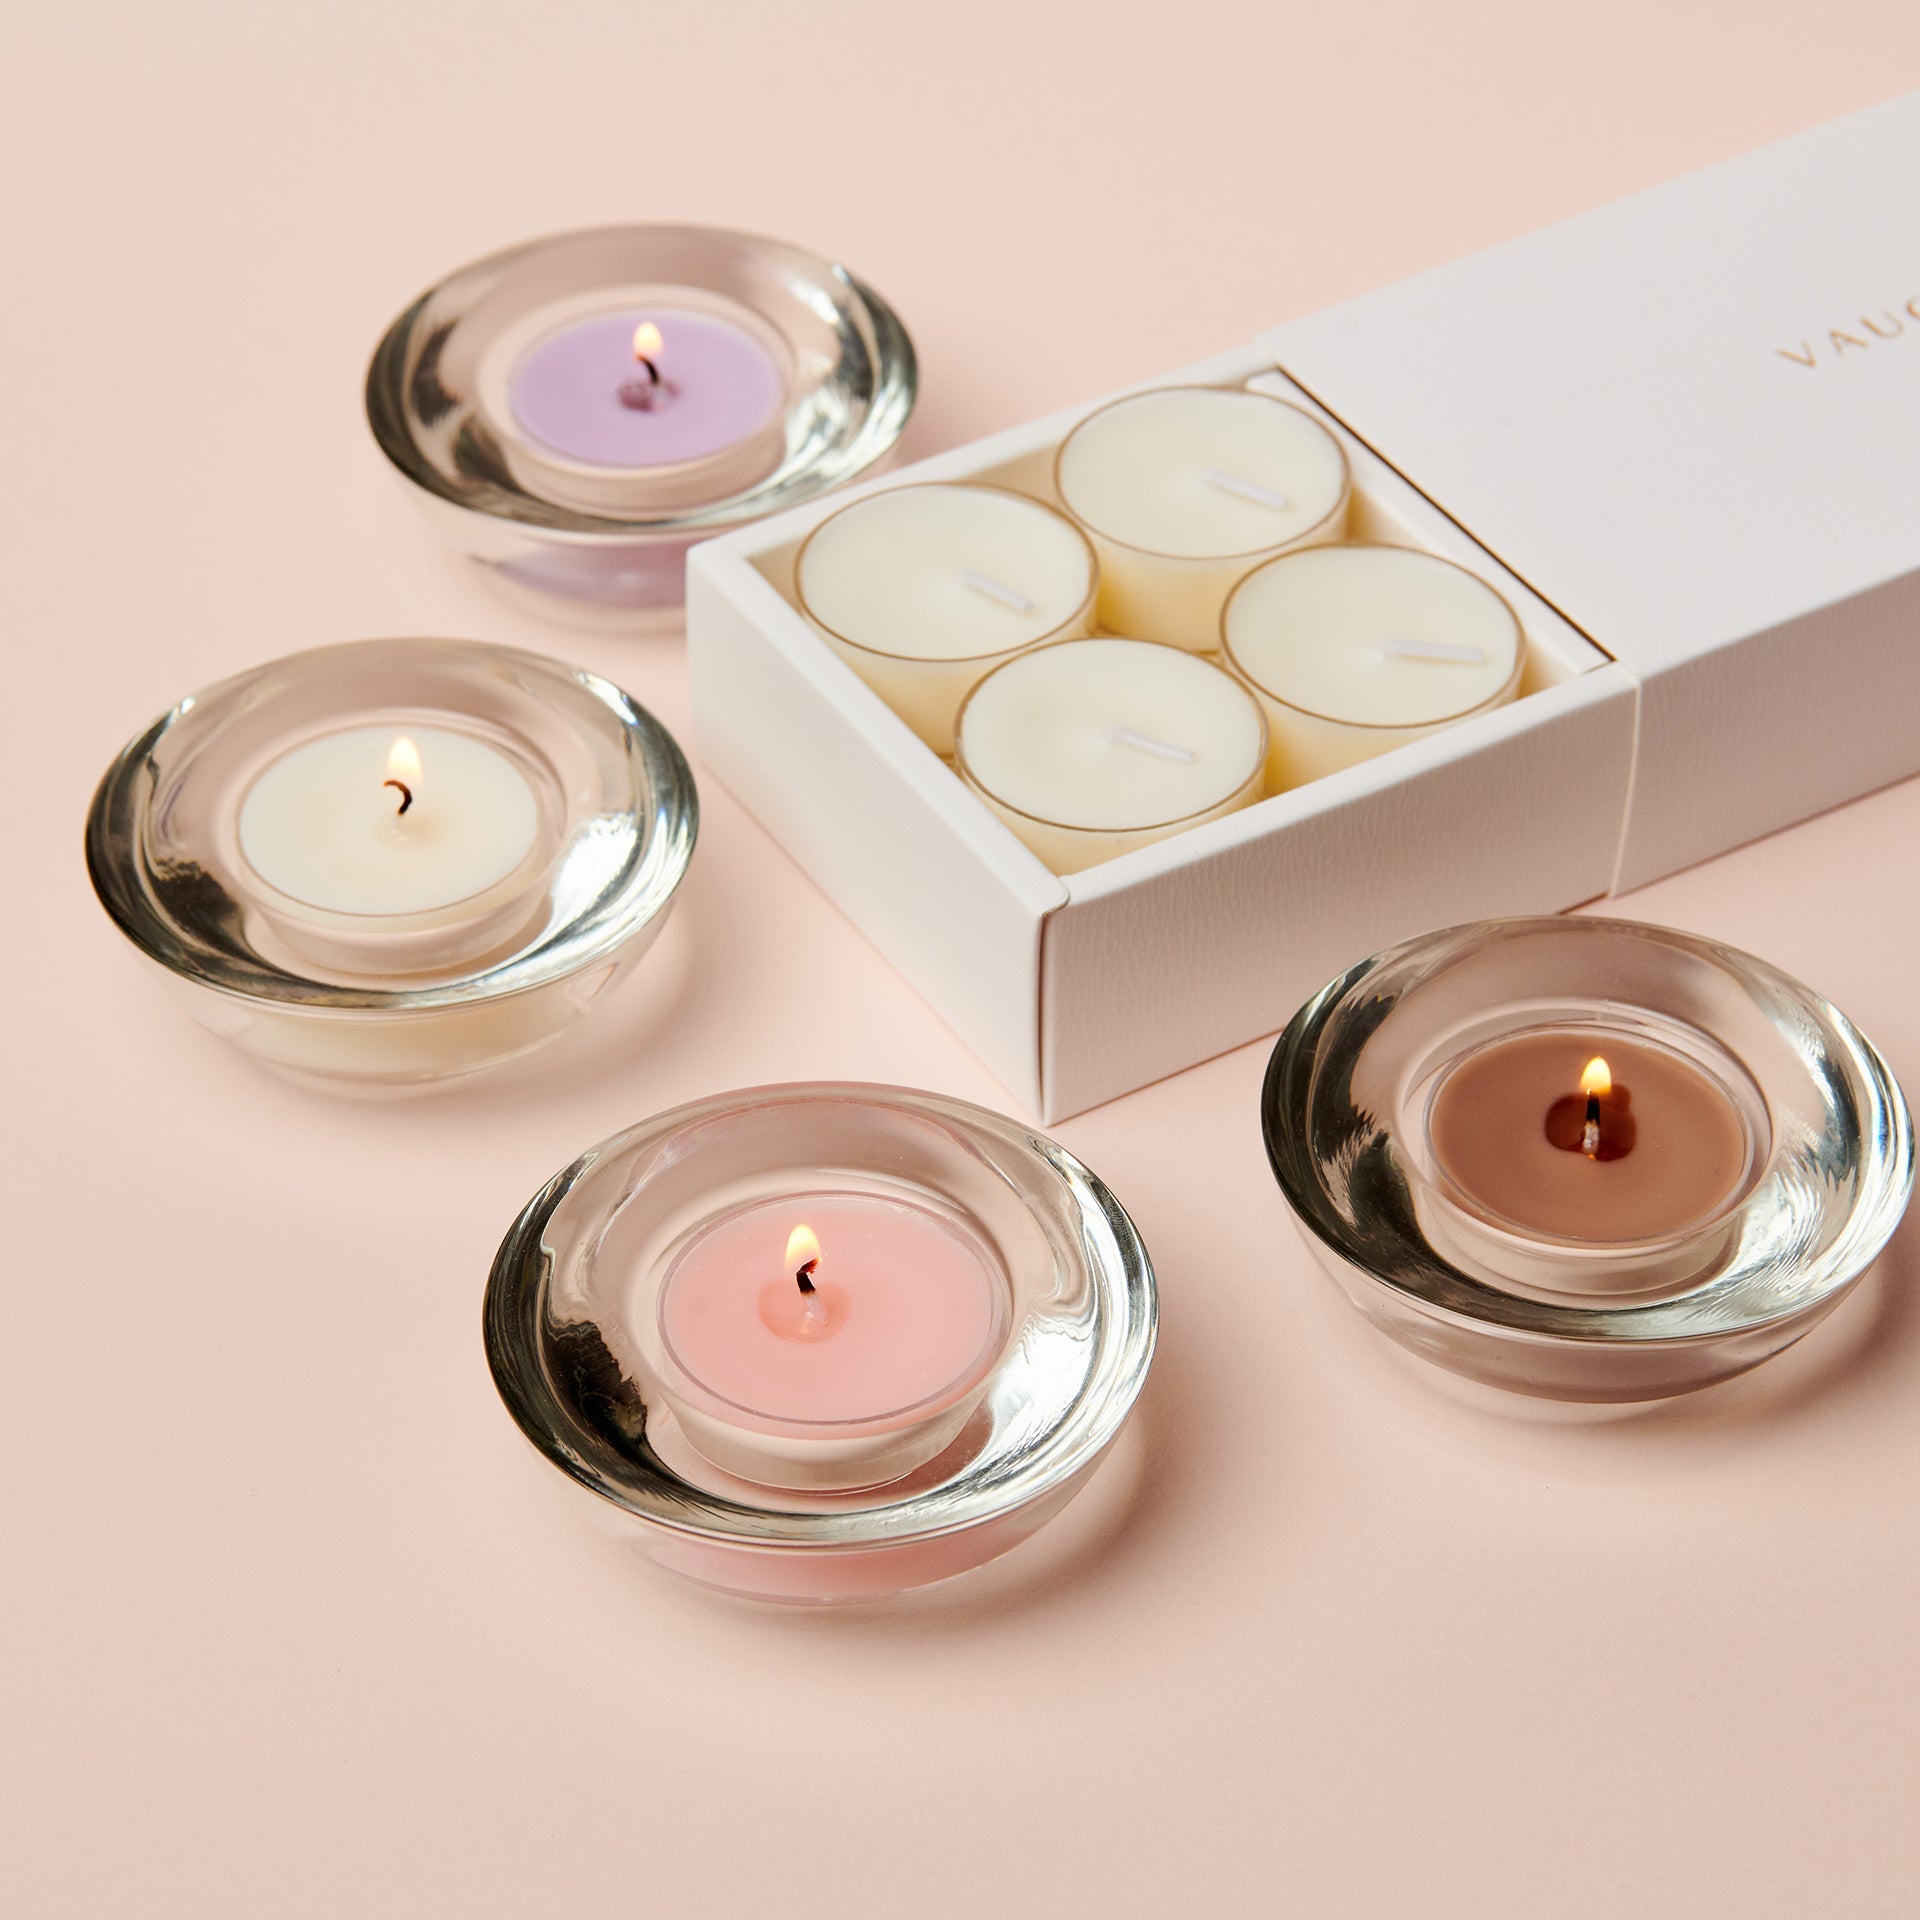 Tealight Candles: Tiny Flames, Big Impact - A Comprehensive Guide - VAUCLUSE